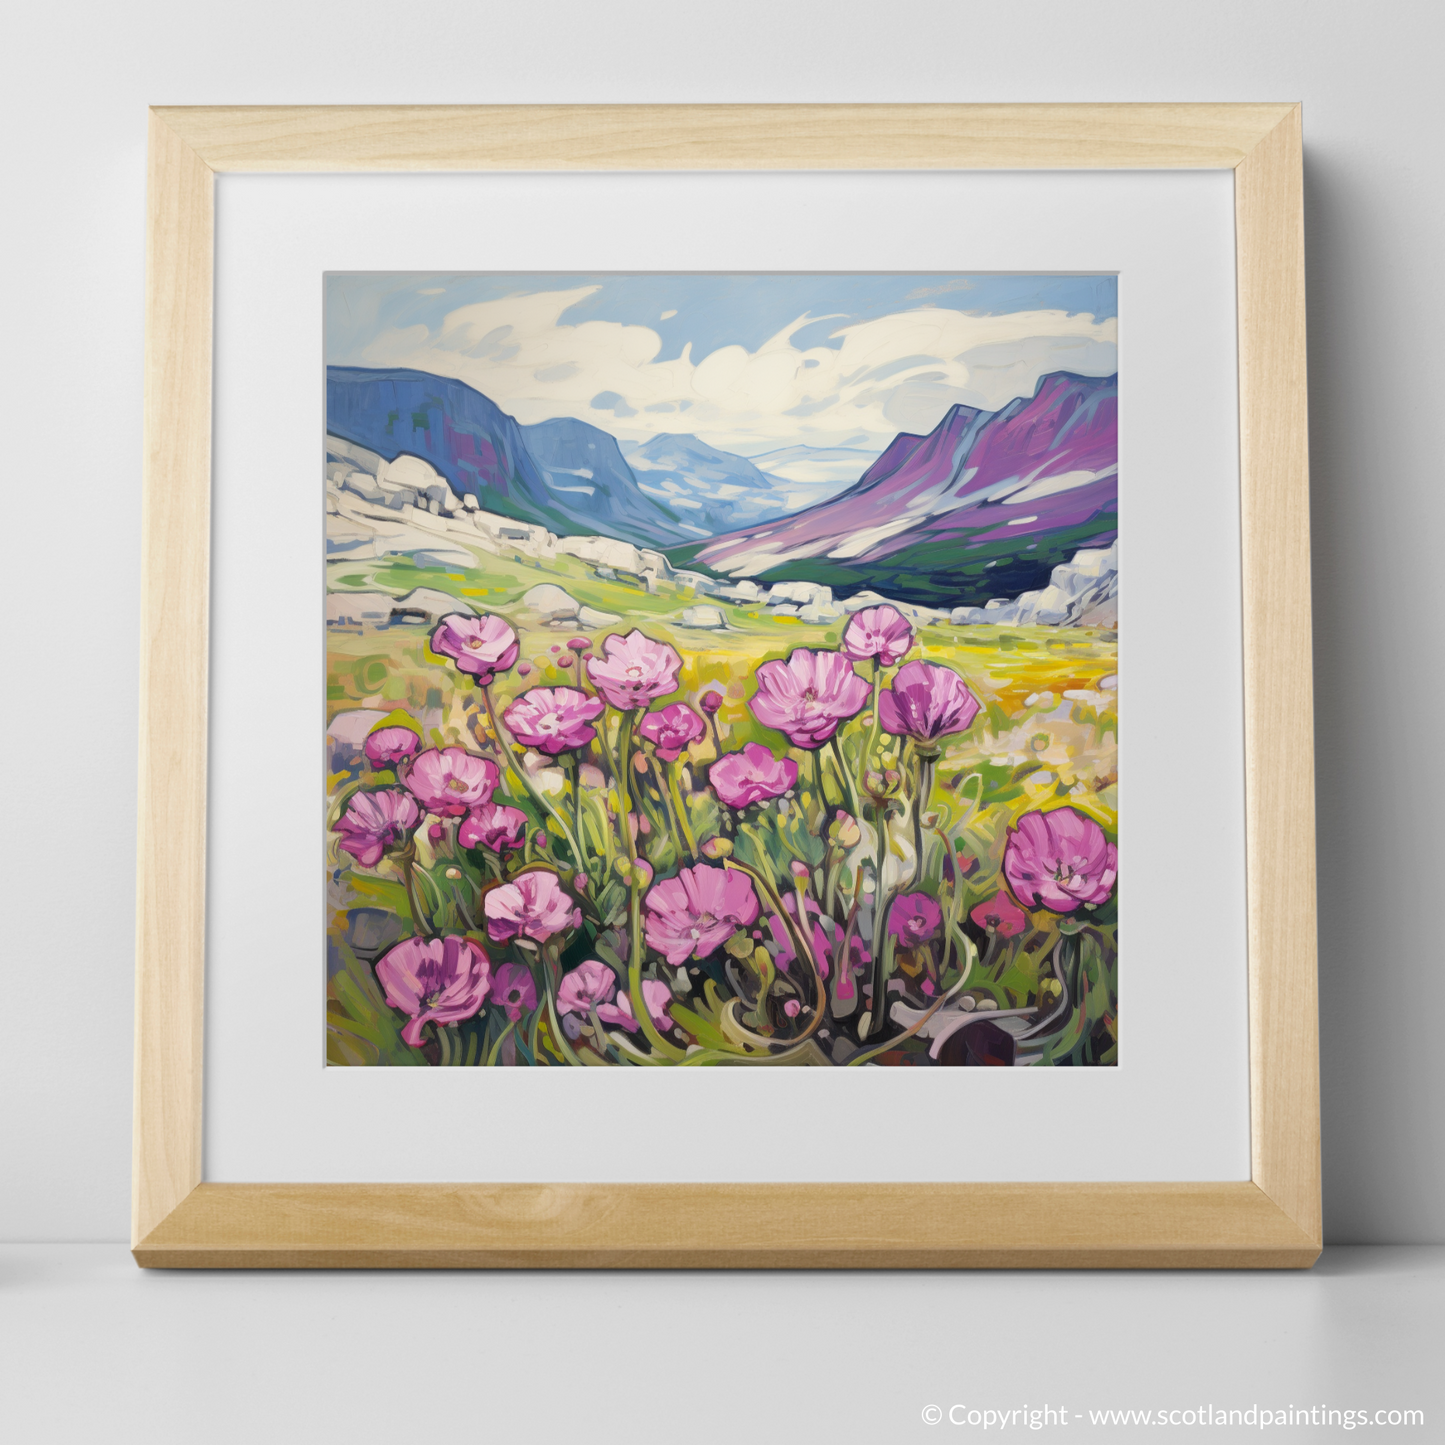 Vivid Cairngorms: A Fauvist Homage to Moss Campion